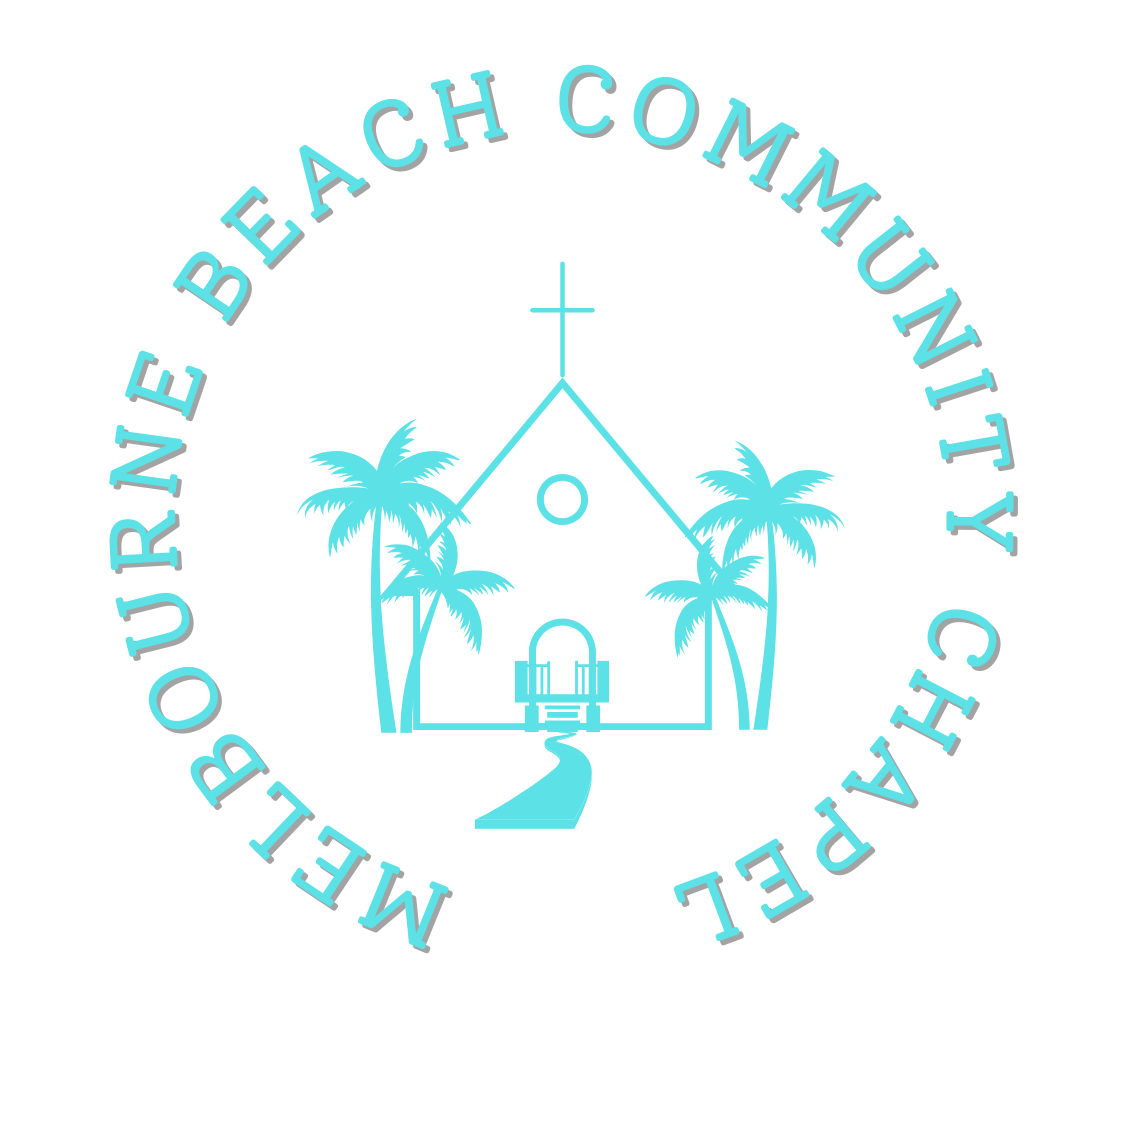 The logo for the melbourne beach community chapel shows a church with palm trees around it.